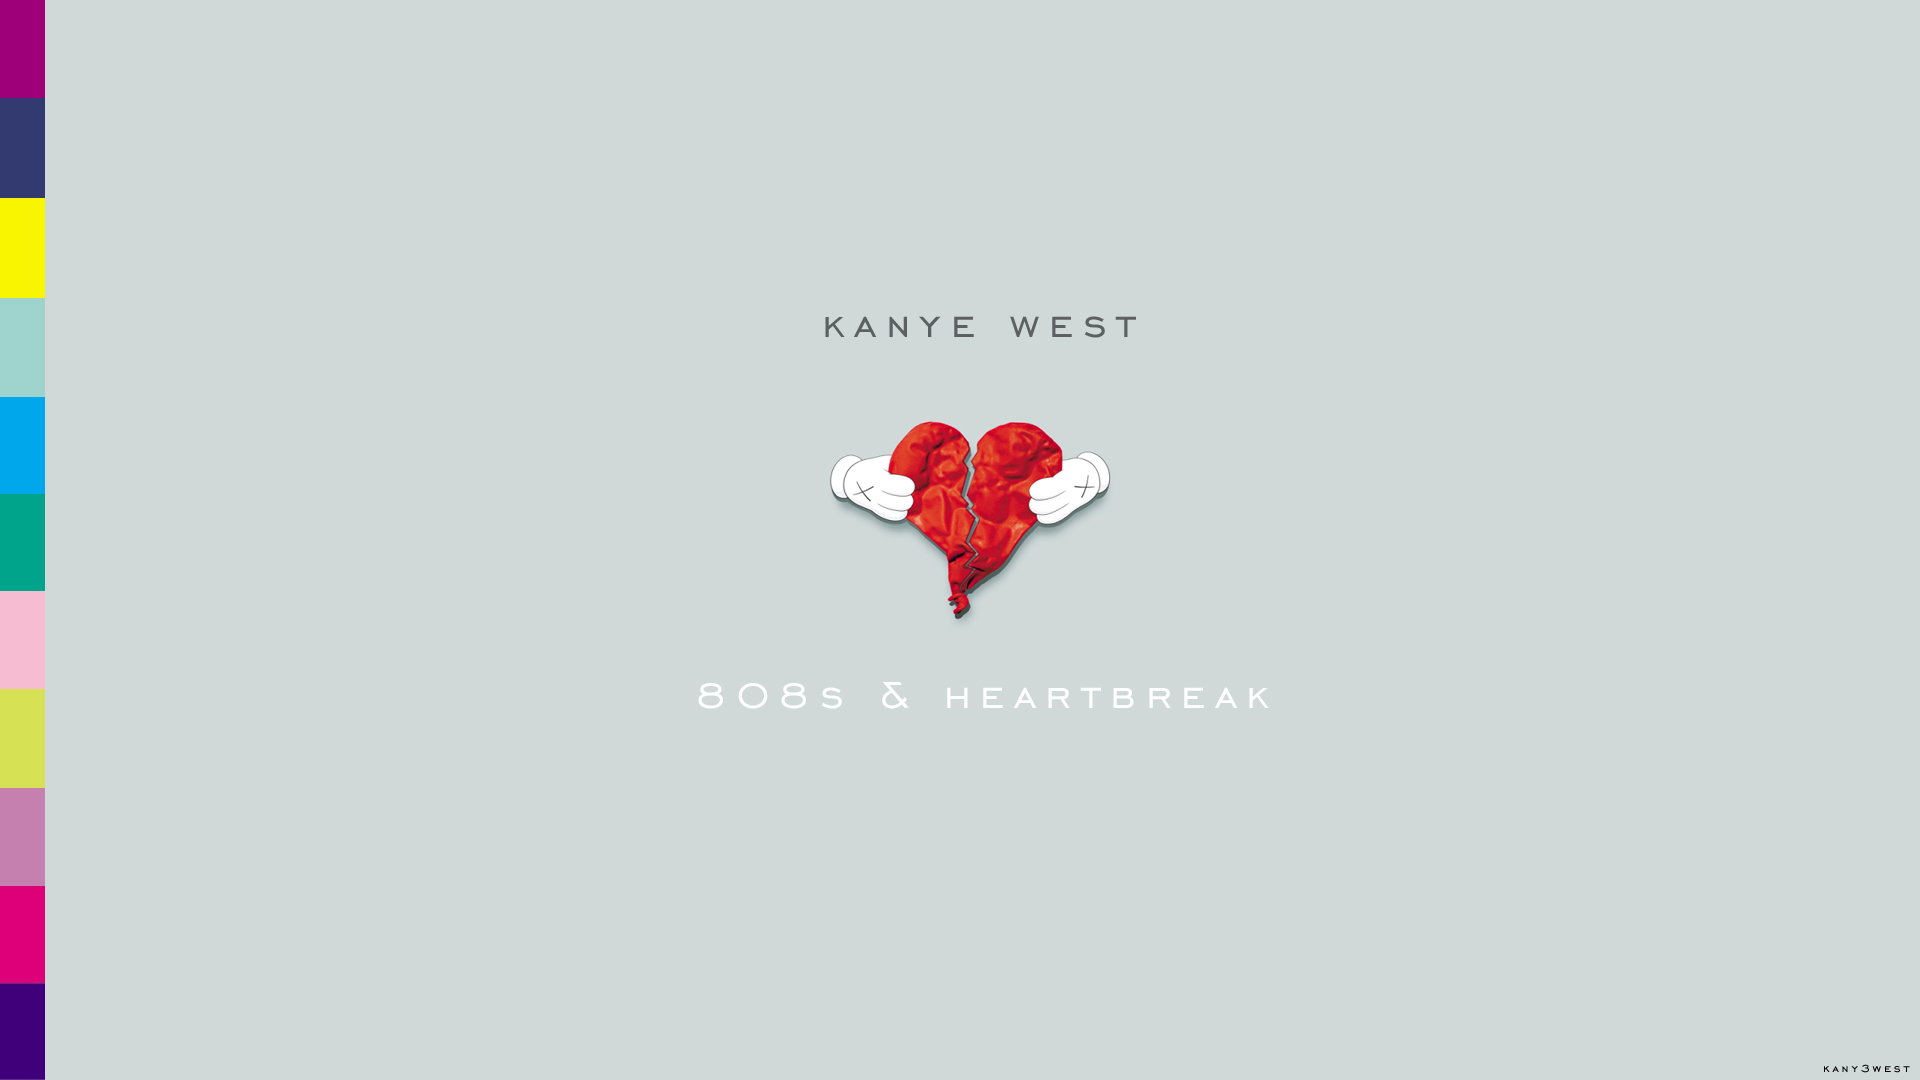 Rolling Stone Lists Kanye West S And Heartbreak As